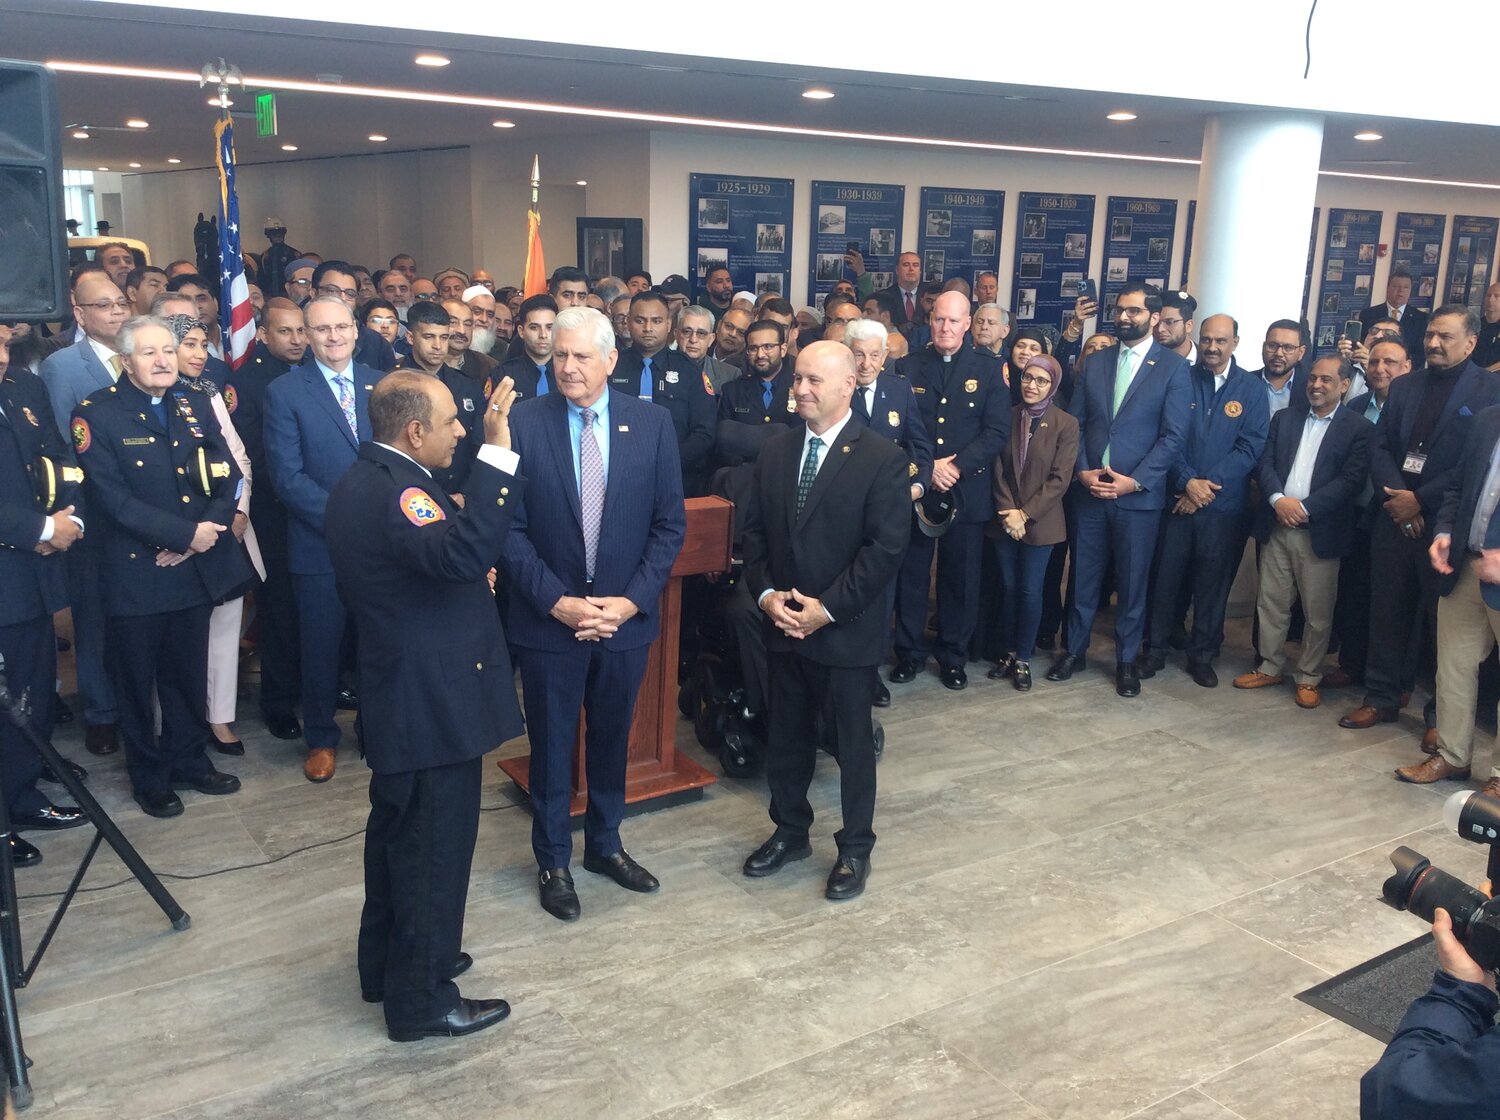 Rashid Khan was sworn in by Nassau County Executive Bruce Blakeman and Police Commissioner Patrick Ryder as the first Muslim chaplain in the NCPD’s history.